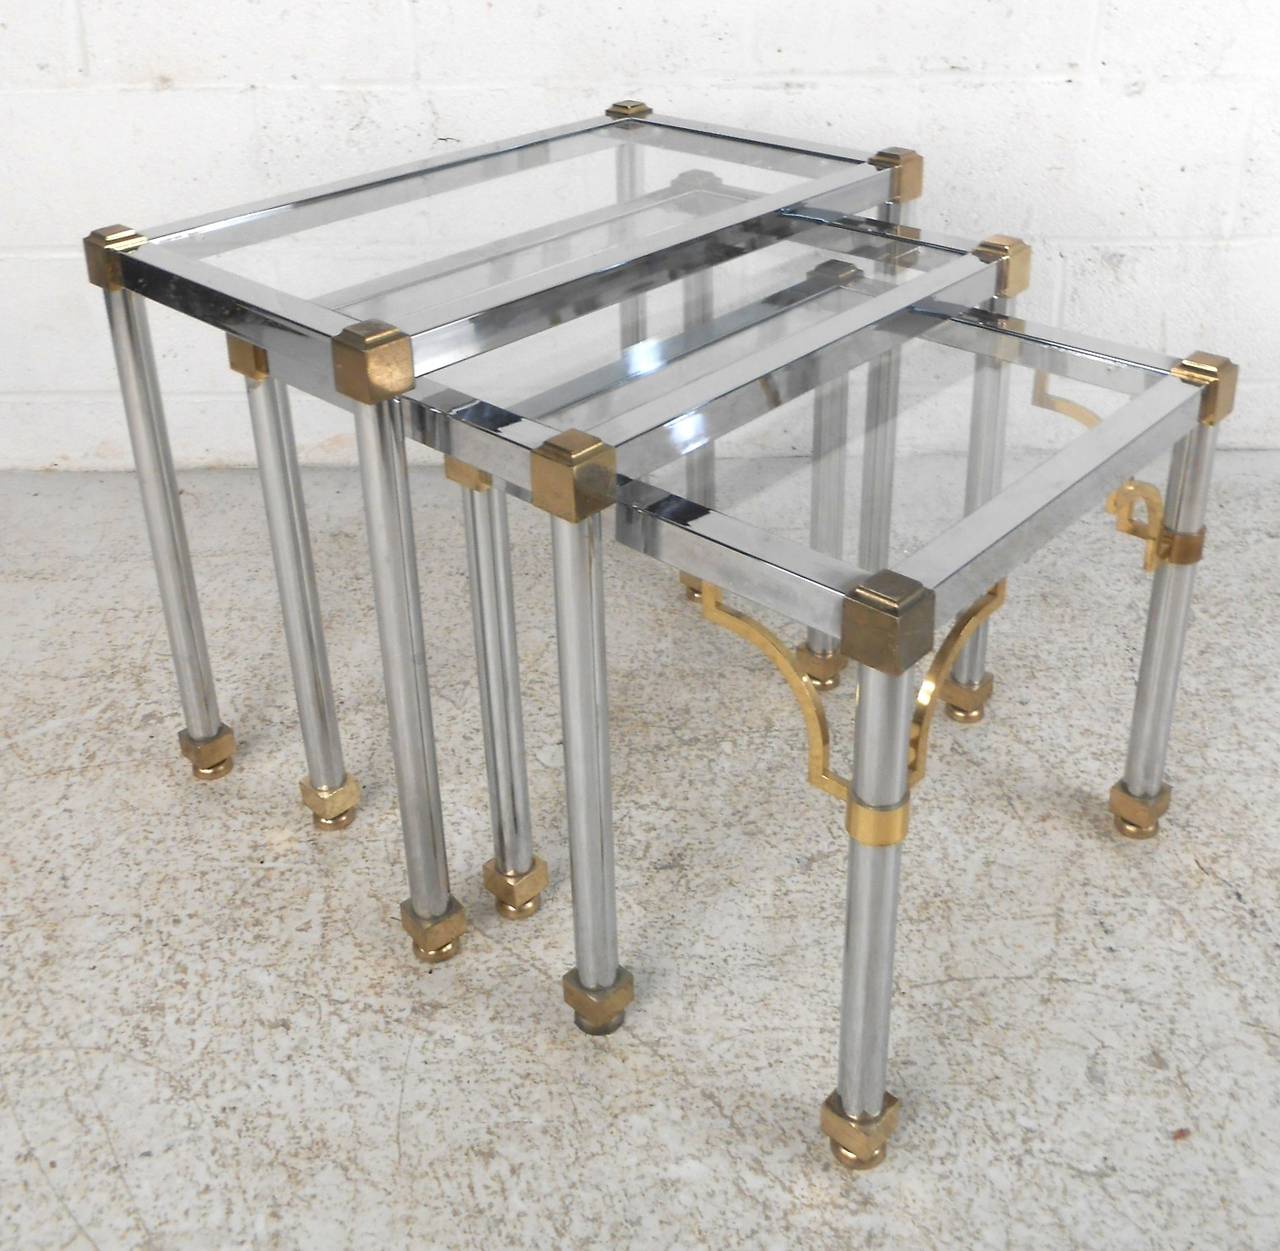 Set of three nesting tables in polished chrome with brass accenting. Made in the manner of Maison Jensen, with glass inset tops.

(Please confirm item location - NY or NJ - with dealer).